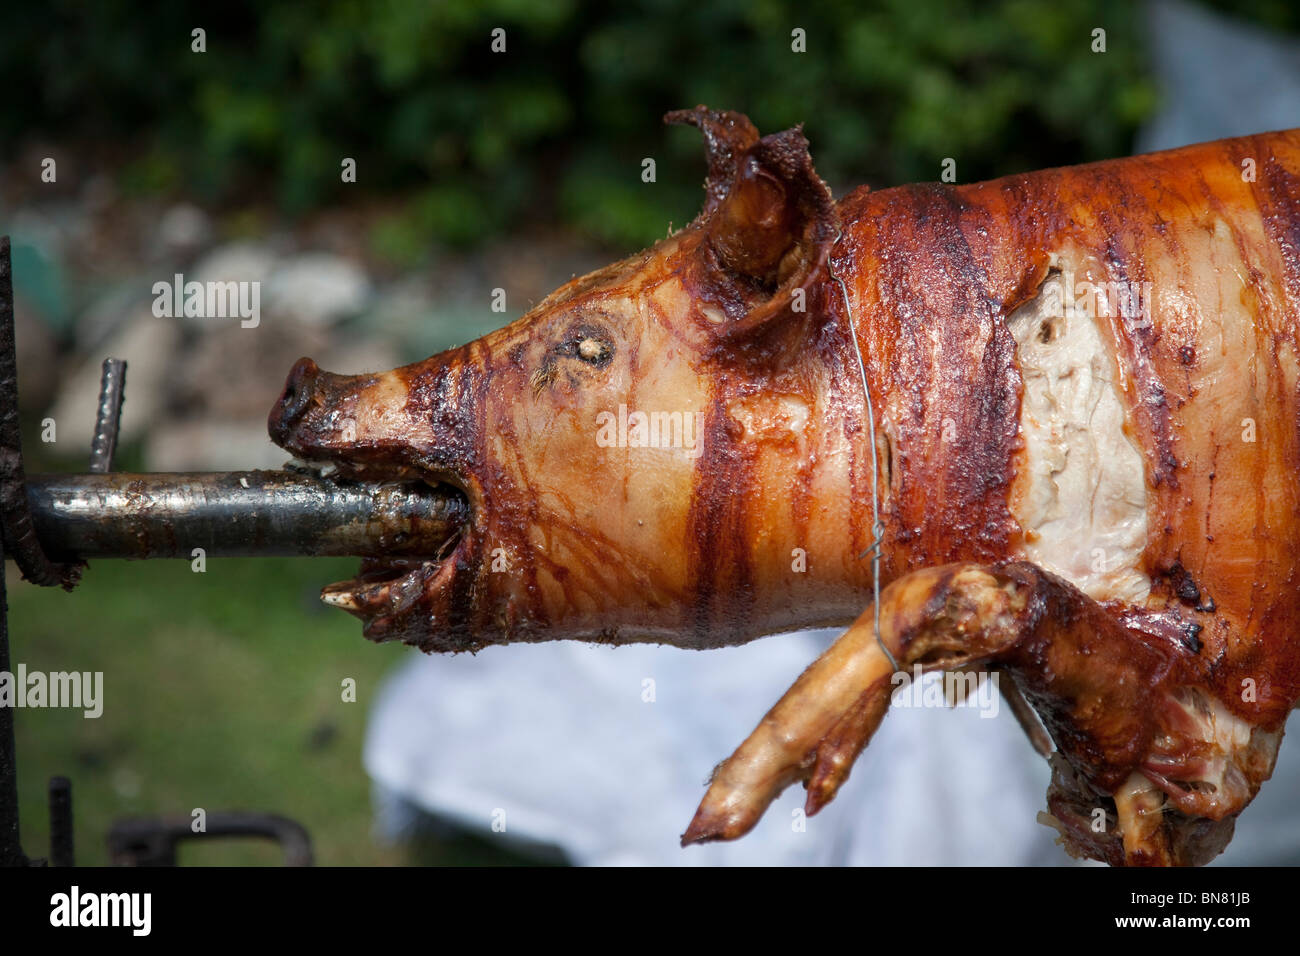 close up of hog roast cooking on spit. Stock Photo